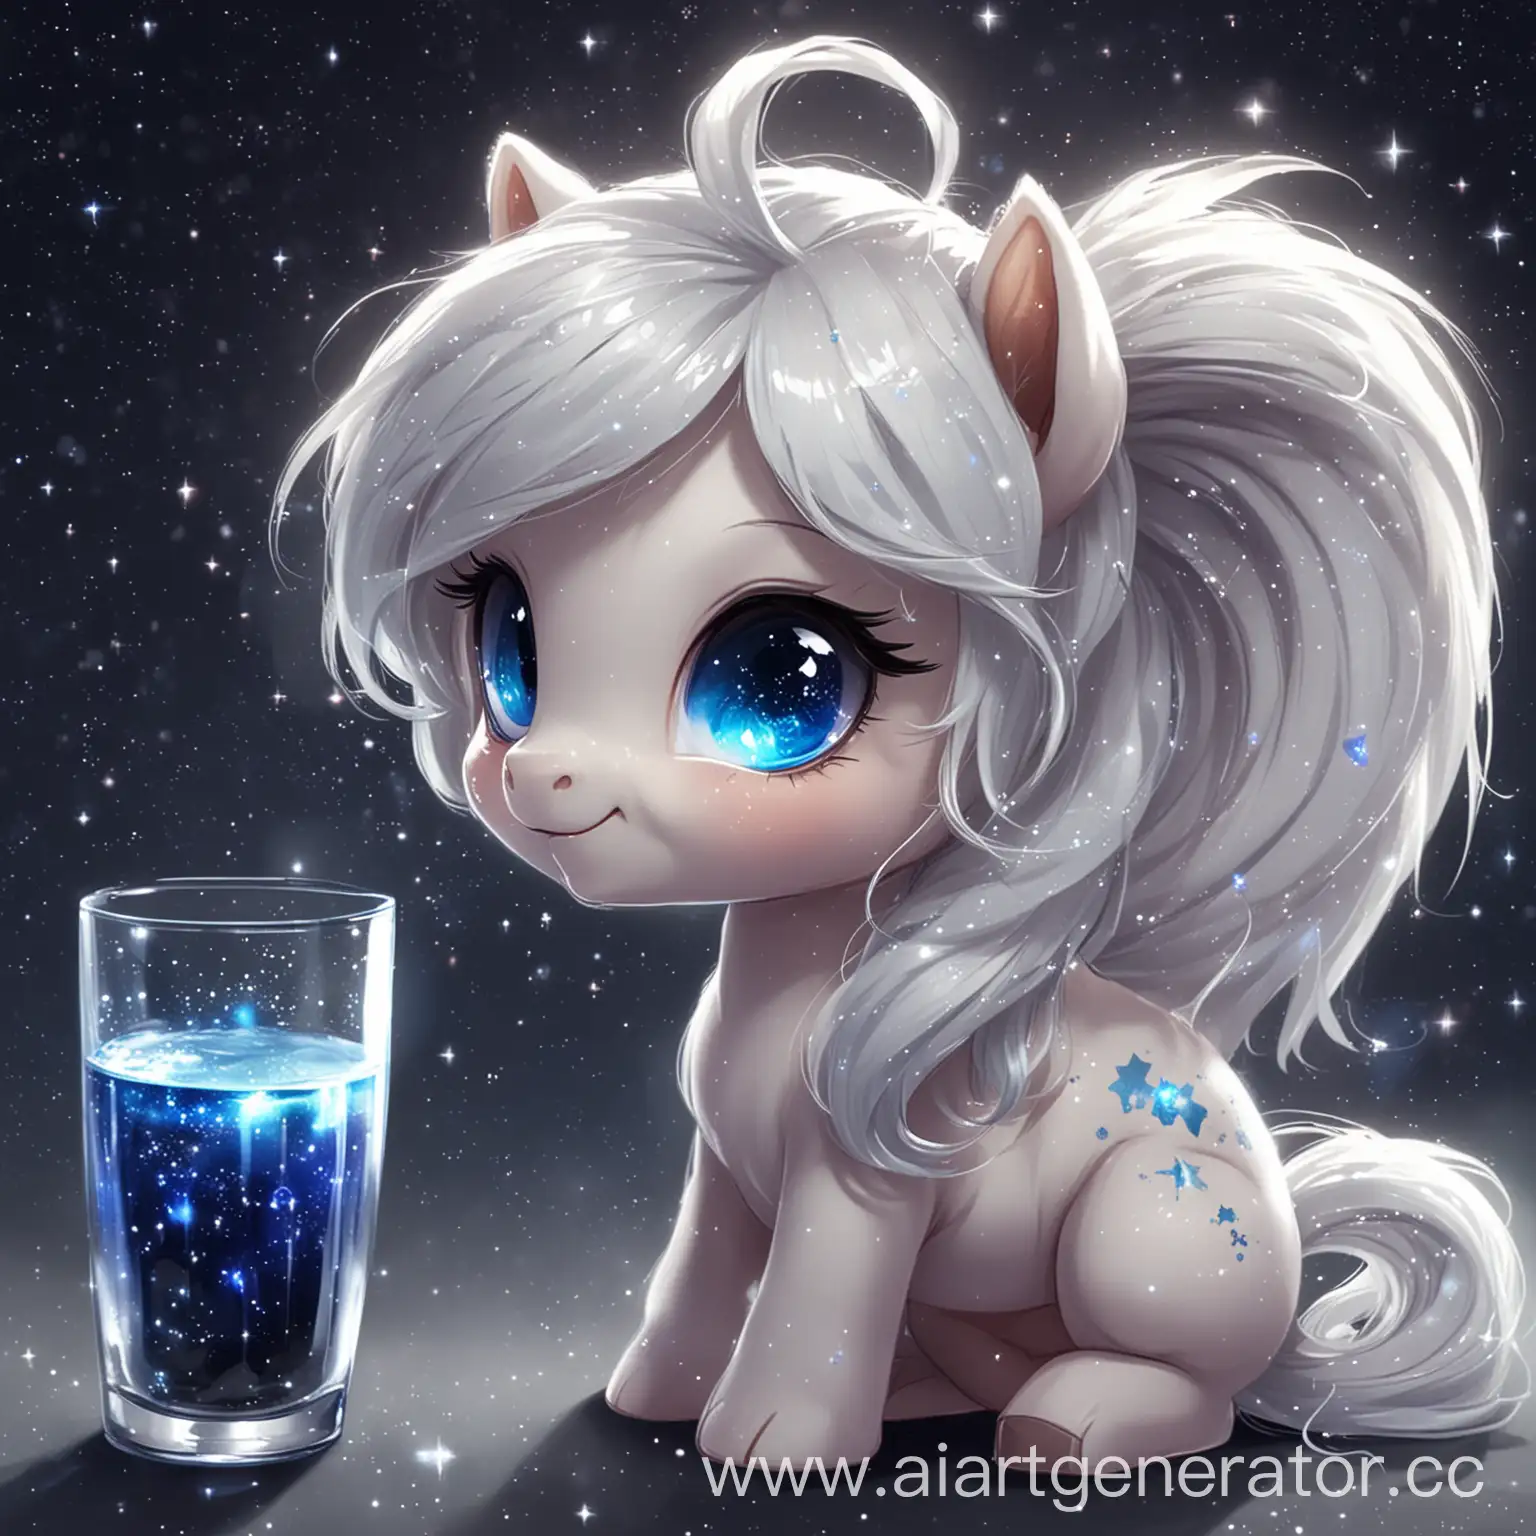 Celestial-Pony-GlassEncased-Milky-Way-with-Long-Hair-and-Blue-Eyes